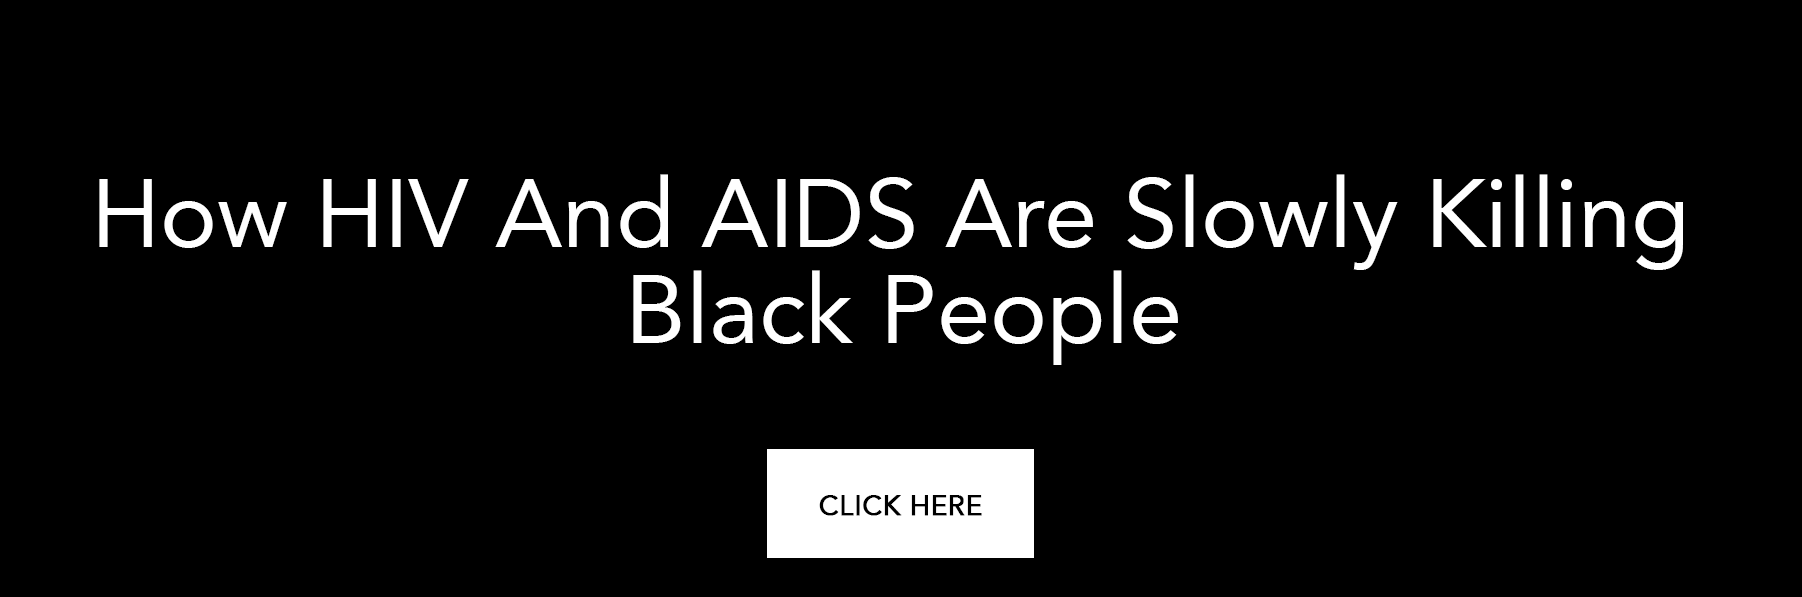 How HIV And AIDS Are Slowly Killing Black People.png